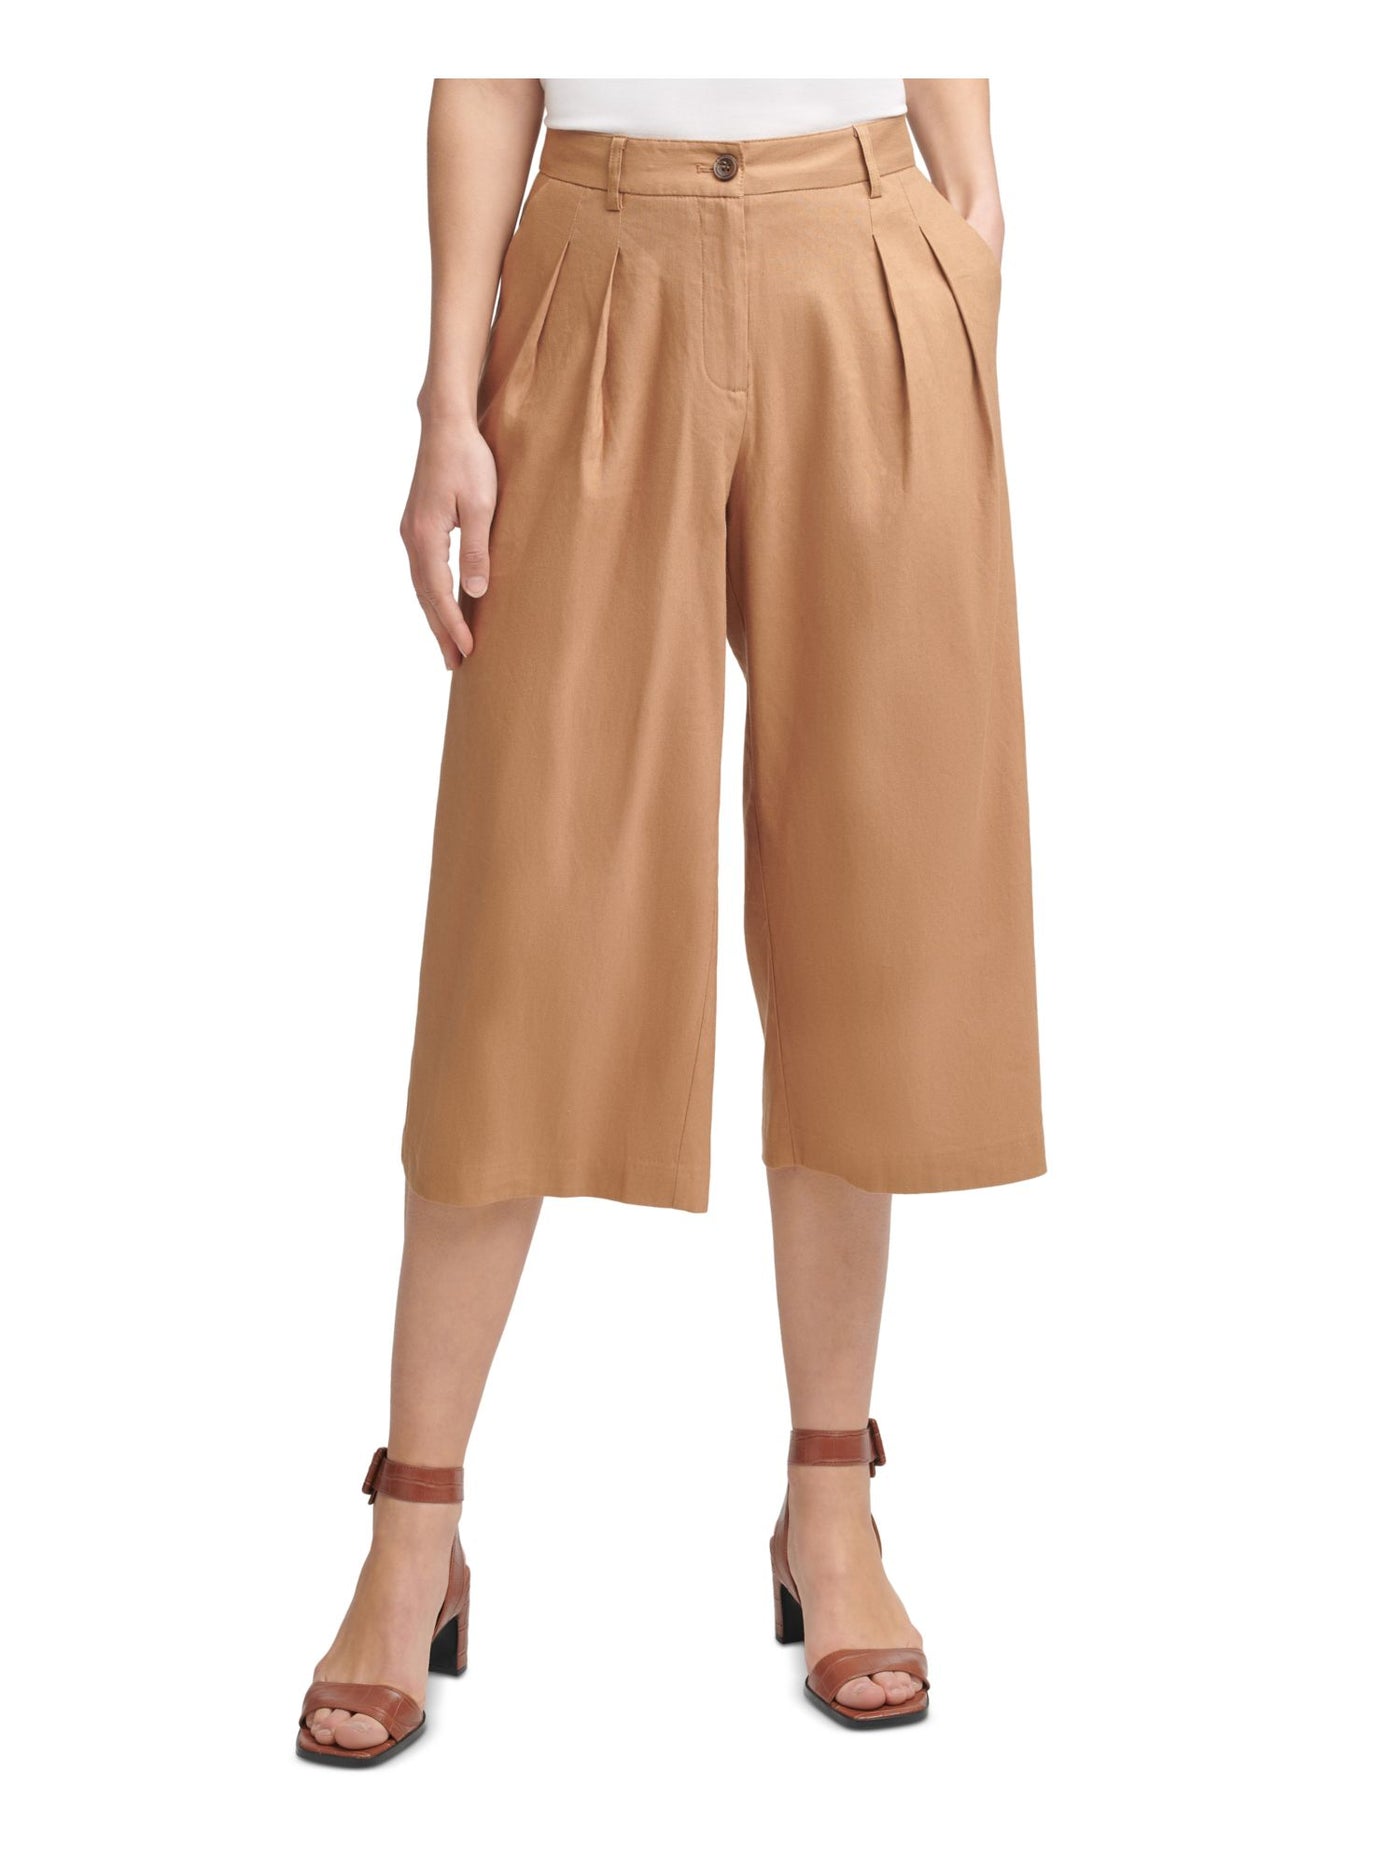 CALVIN KLEIN Womens Beige Pleated Zippered Pocketed Cropped Wear To Work Wide Leg Pants 10